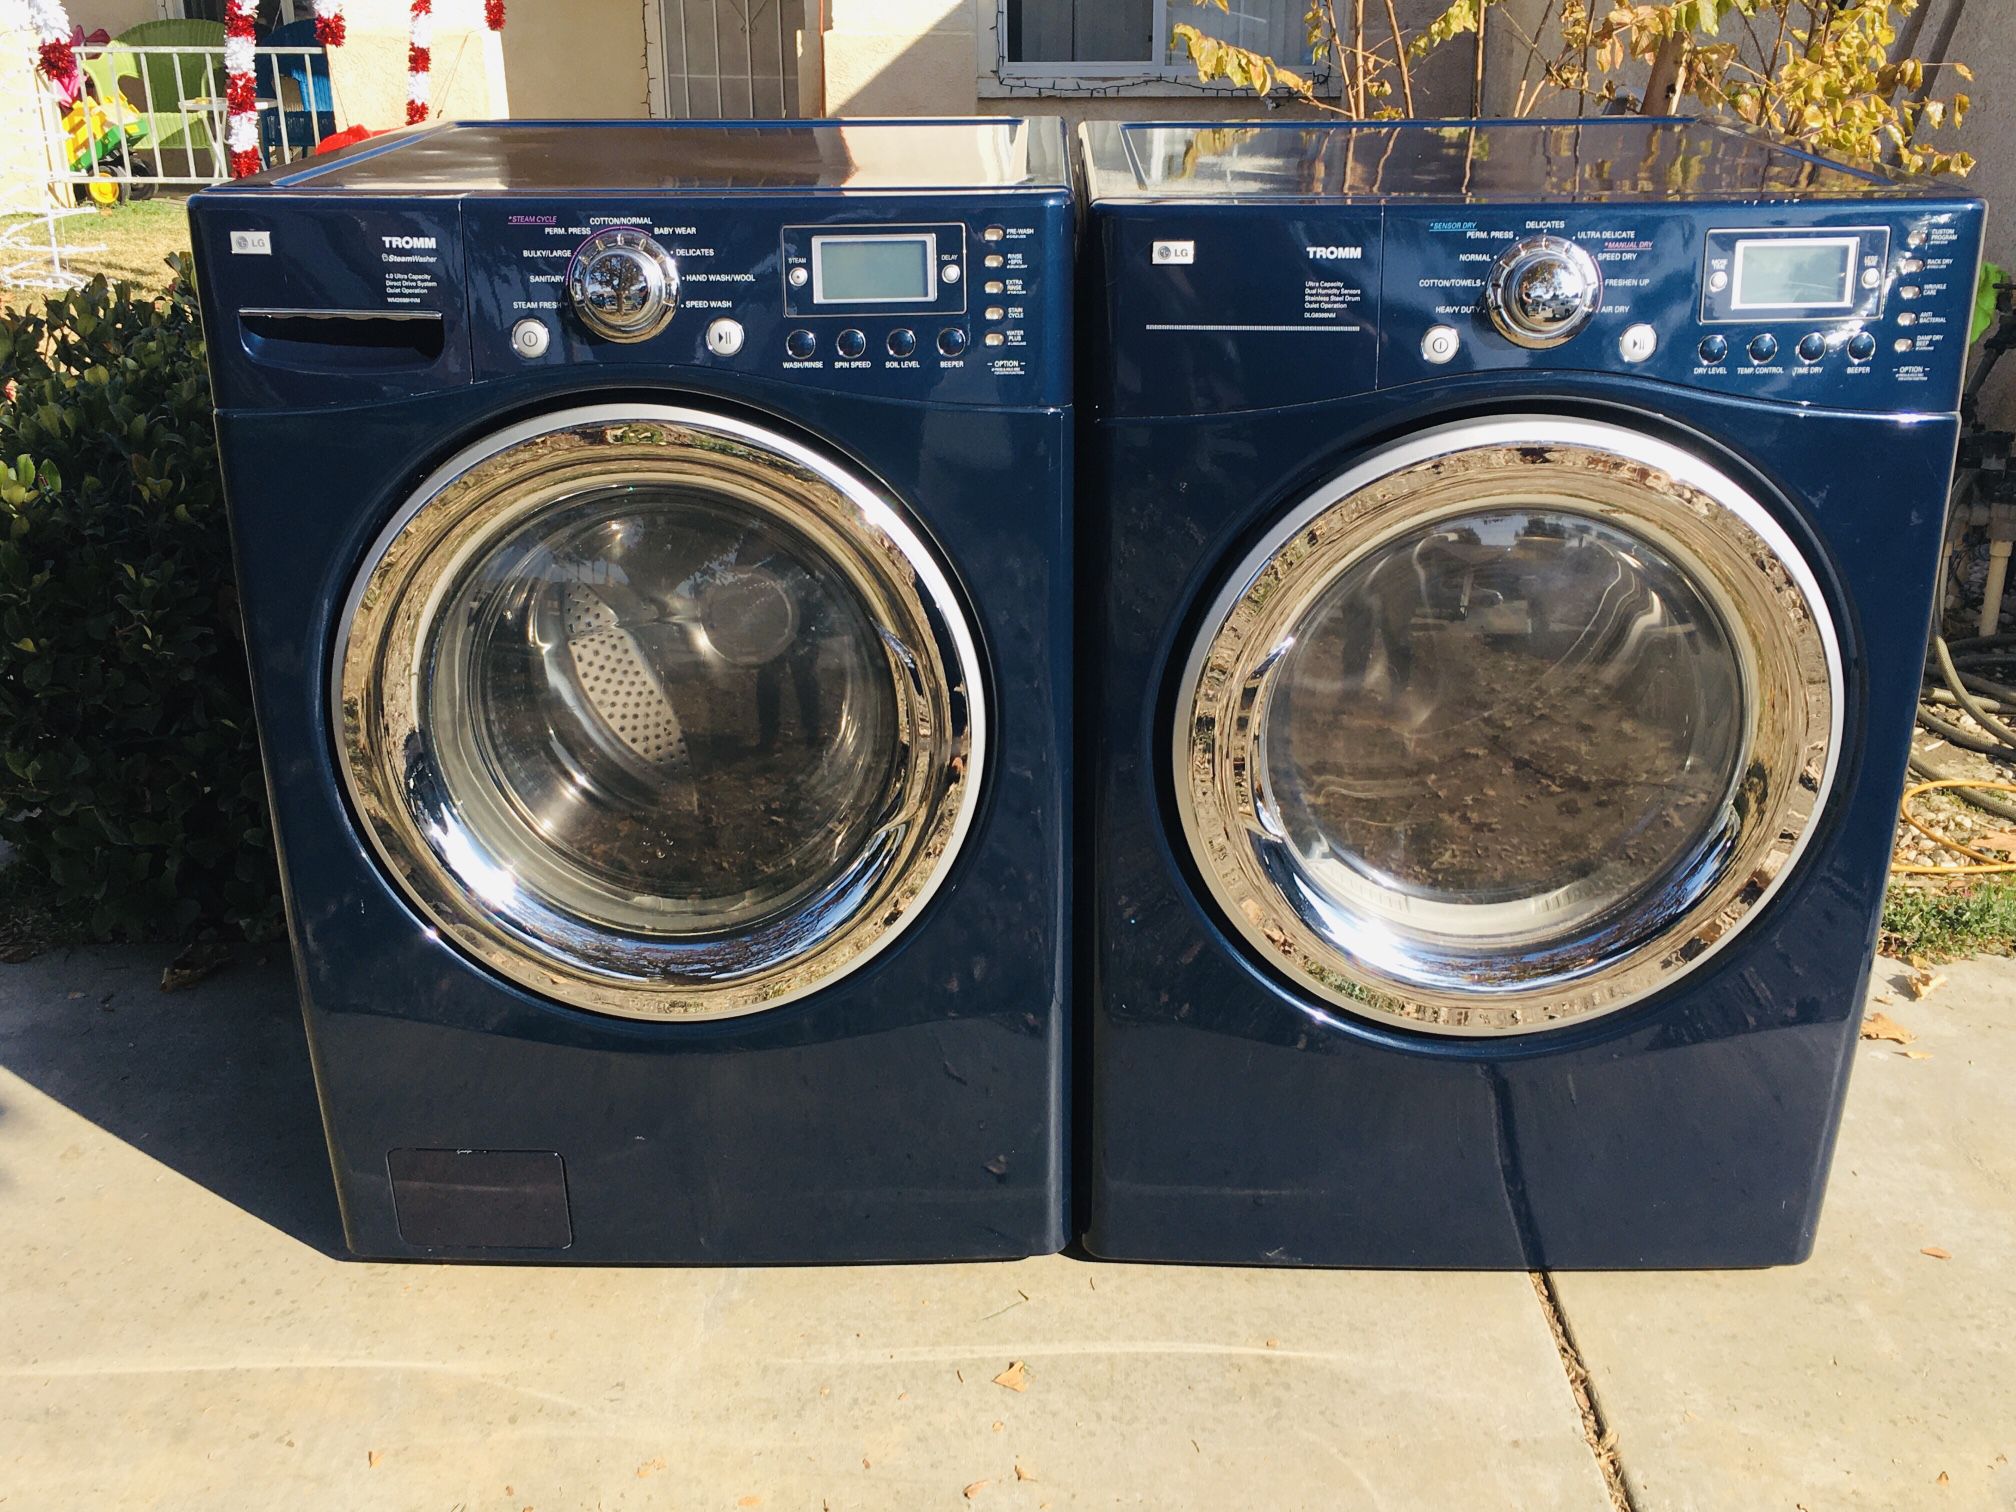 Beautiful Blue Lg Tromm Frontload Washer And Gas Dryer